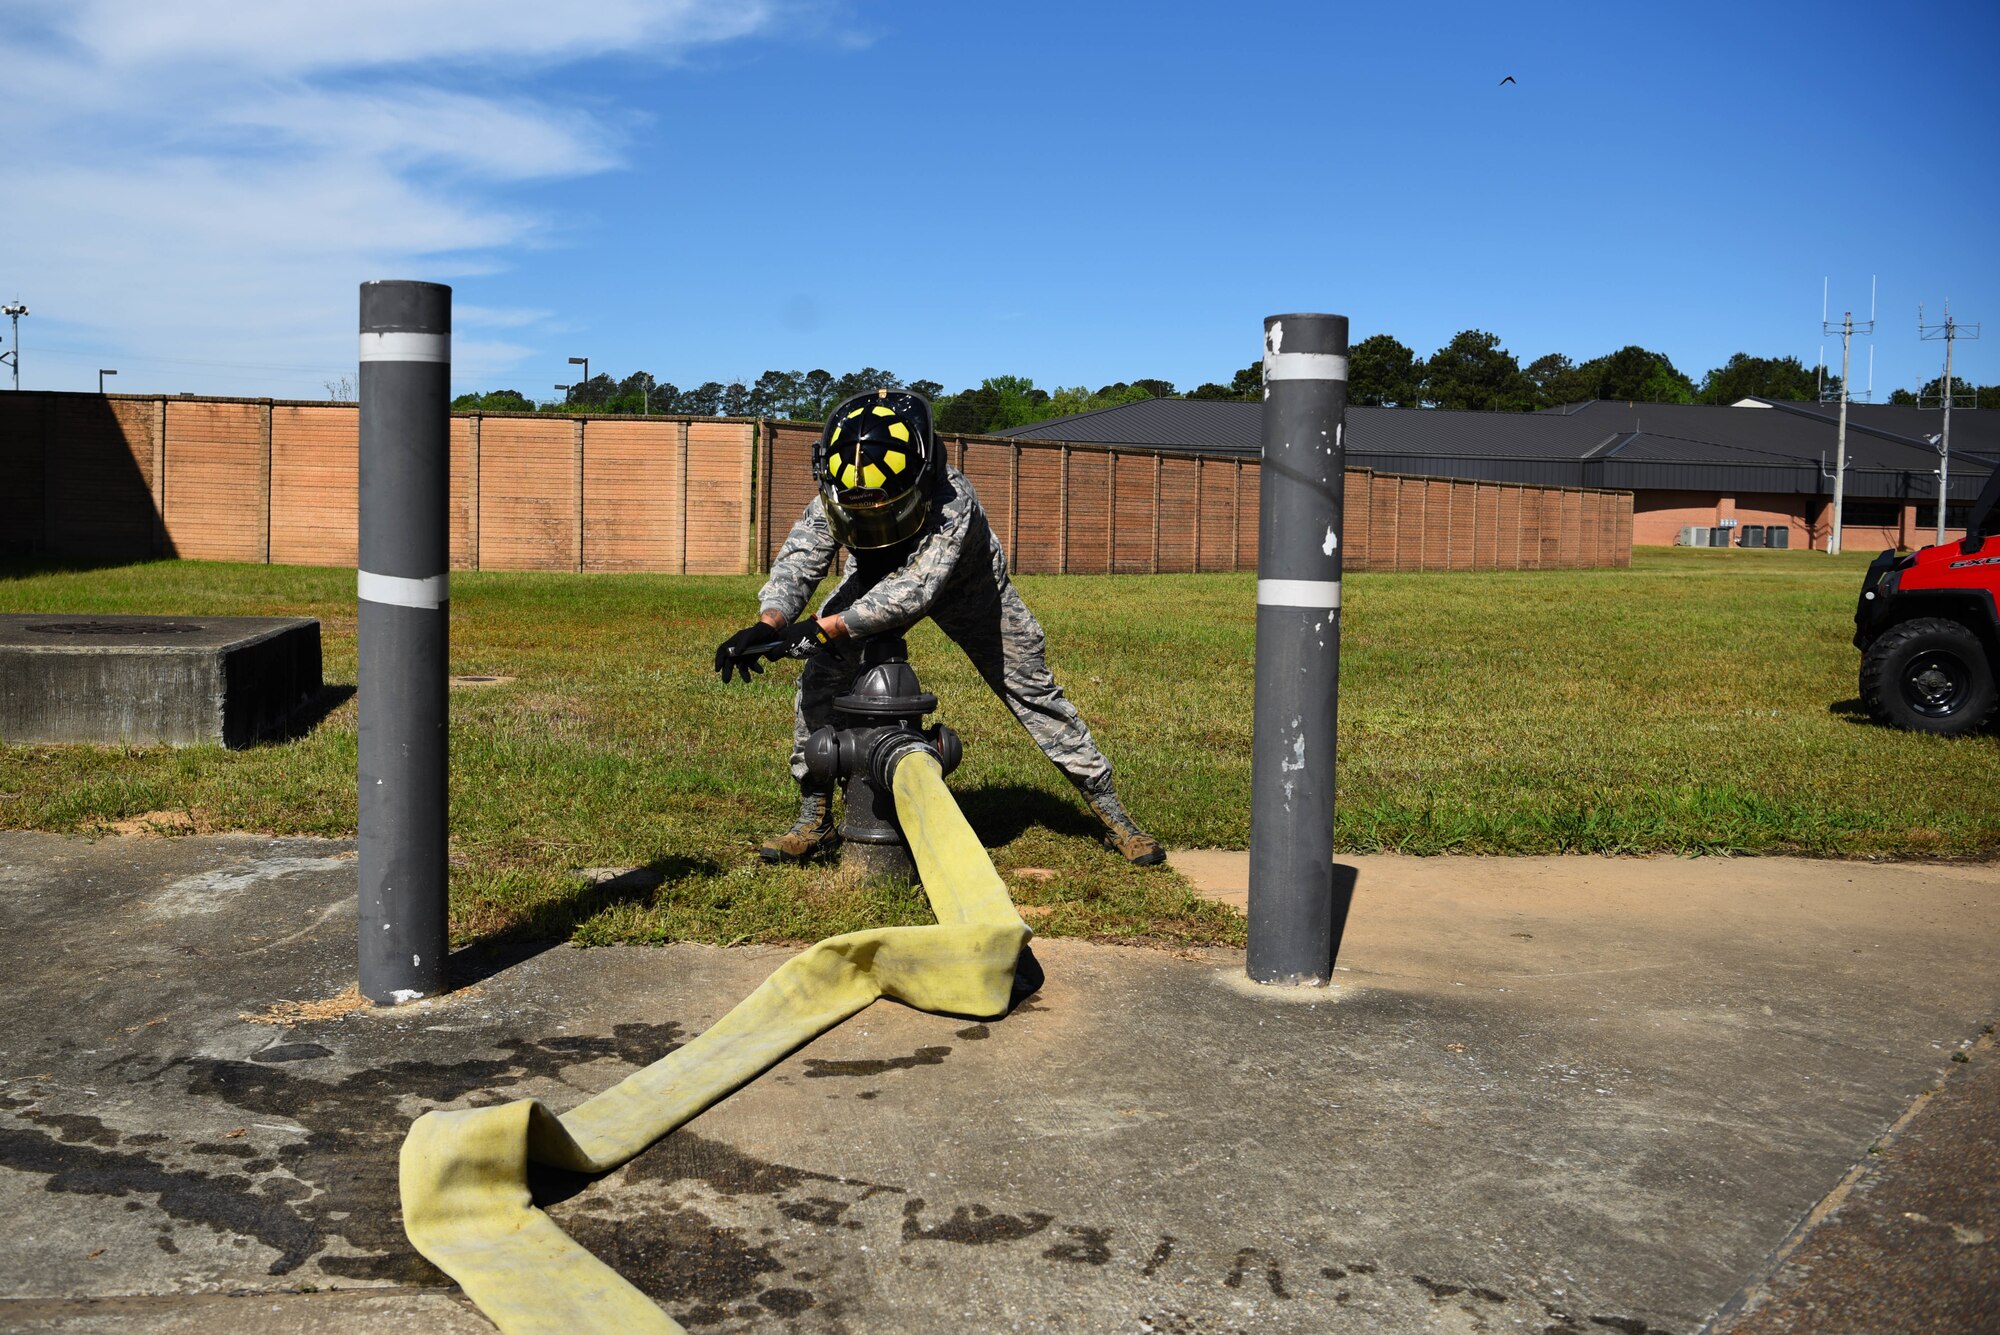 Airman 1st Class Khalil Jeter, 14th Civil Engineer Squadron firefighter, releases water from a fire hydrant April 10, 2020, on Columbus Air Force Base, Miss. A Striker 1500 can hold up to 1,500 gallons of water in them to ensure readiness and the protection of the community in emergency situations. (U.S. Air Force photo by Airman 1st Class Jake Jacobsen)